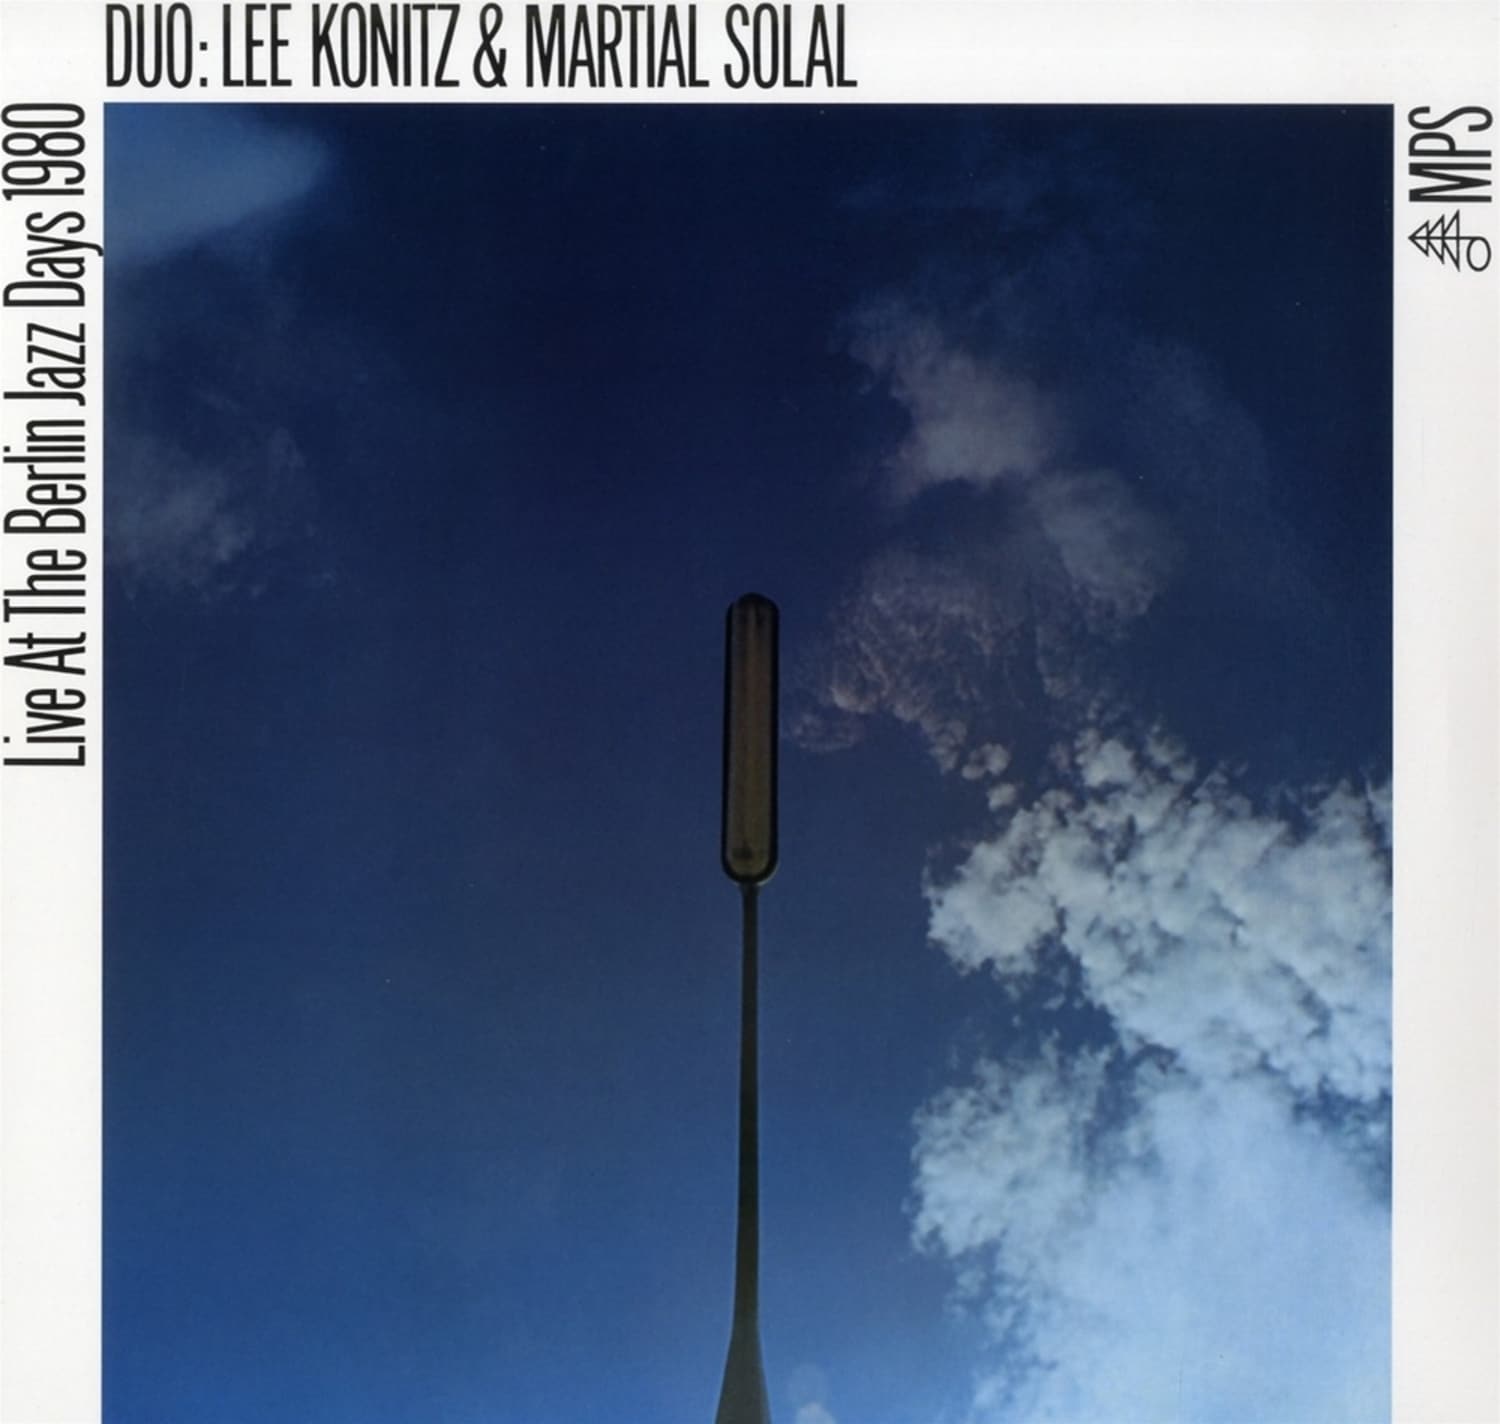 Lee Konitz /Martial Solal - LIVE AT THE BERLIN JAZZ DAYS 1980 